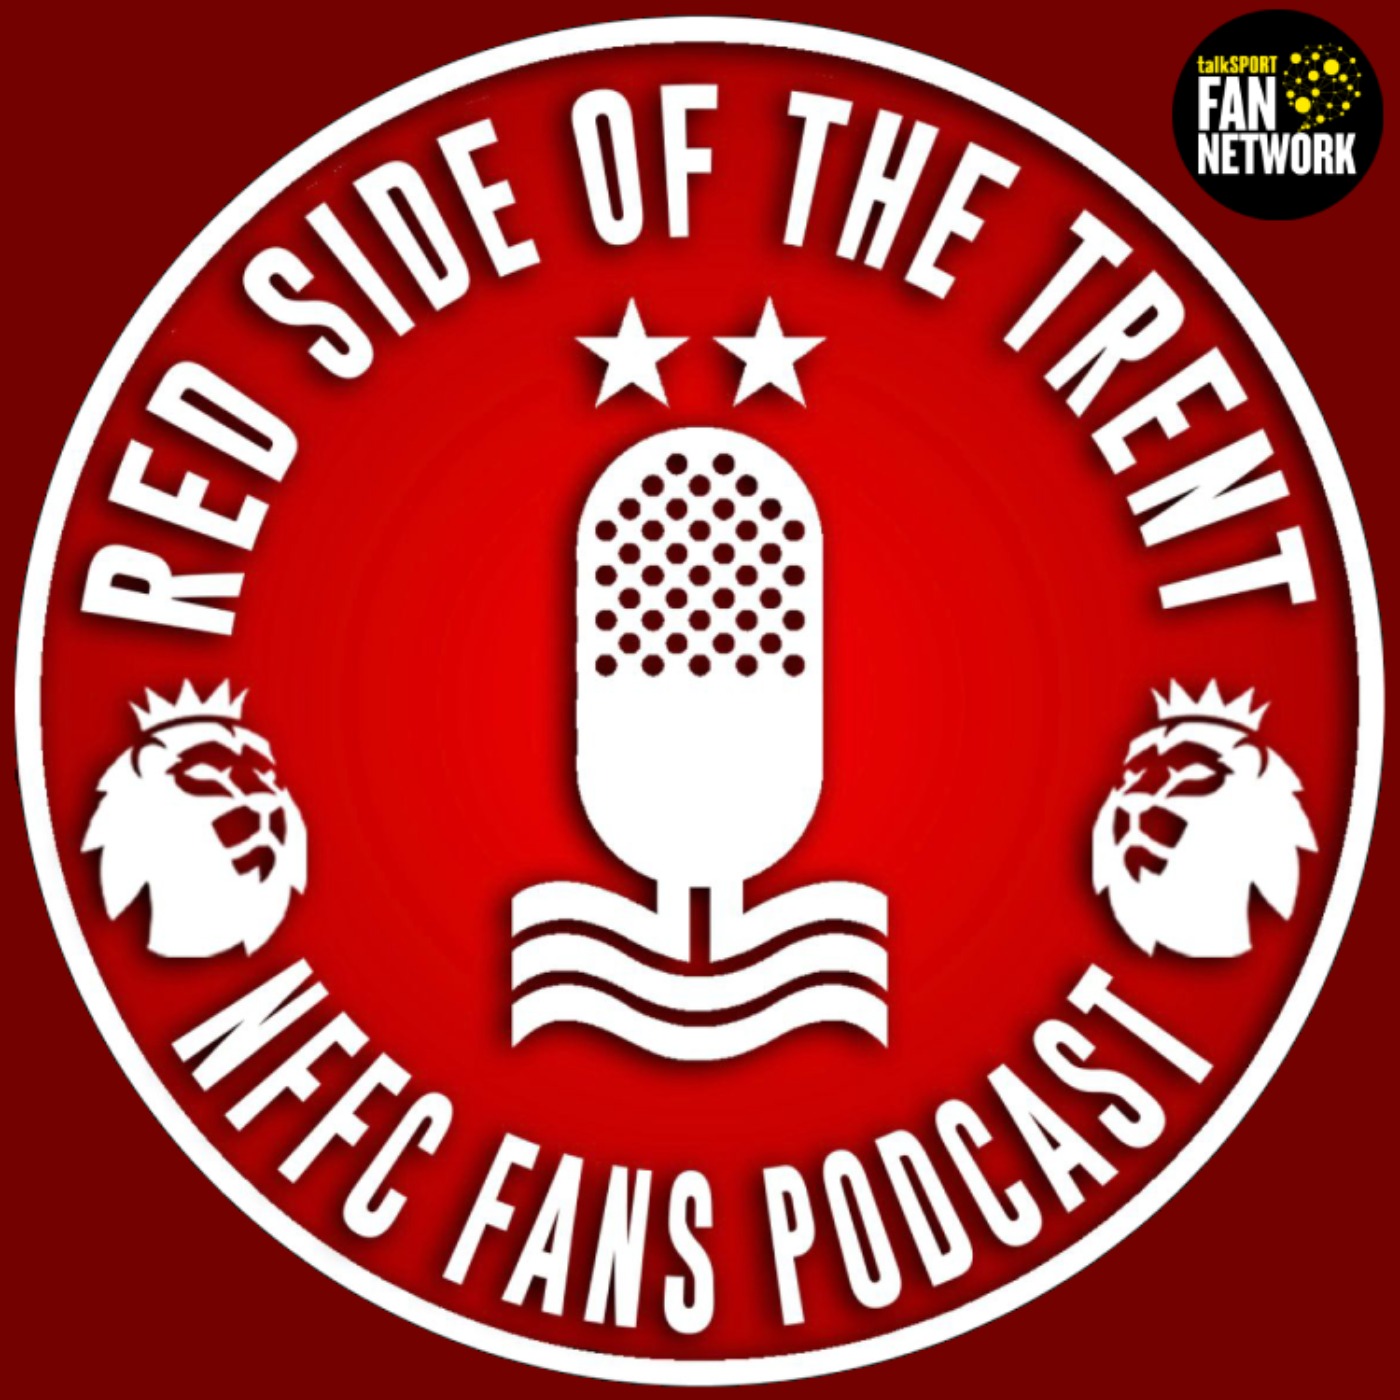 Red Side of the Trent - Nottingham Forest Podcast